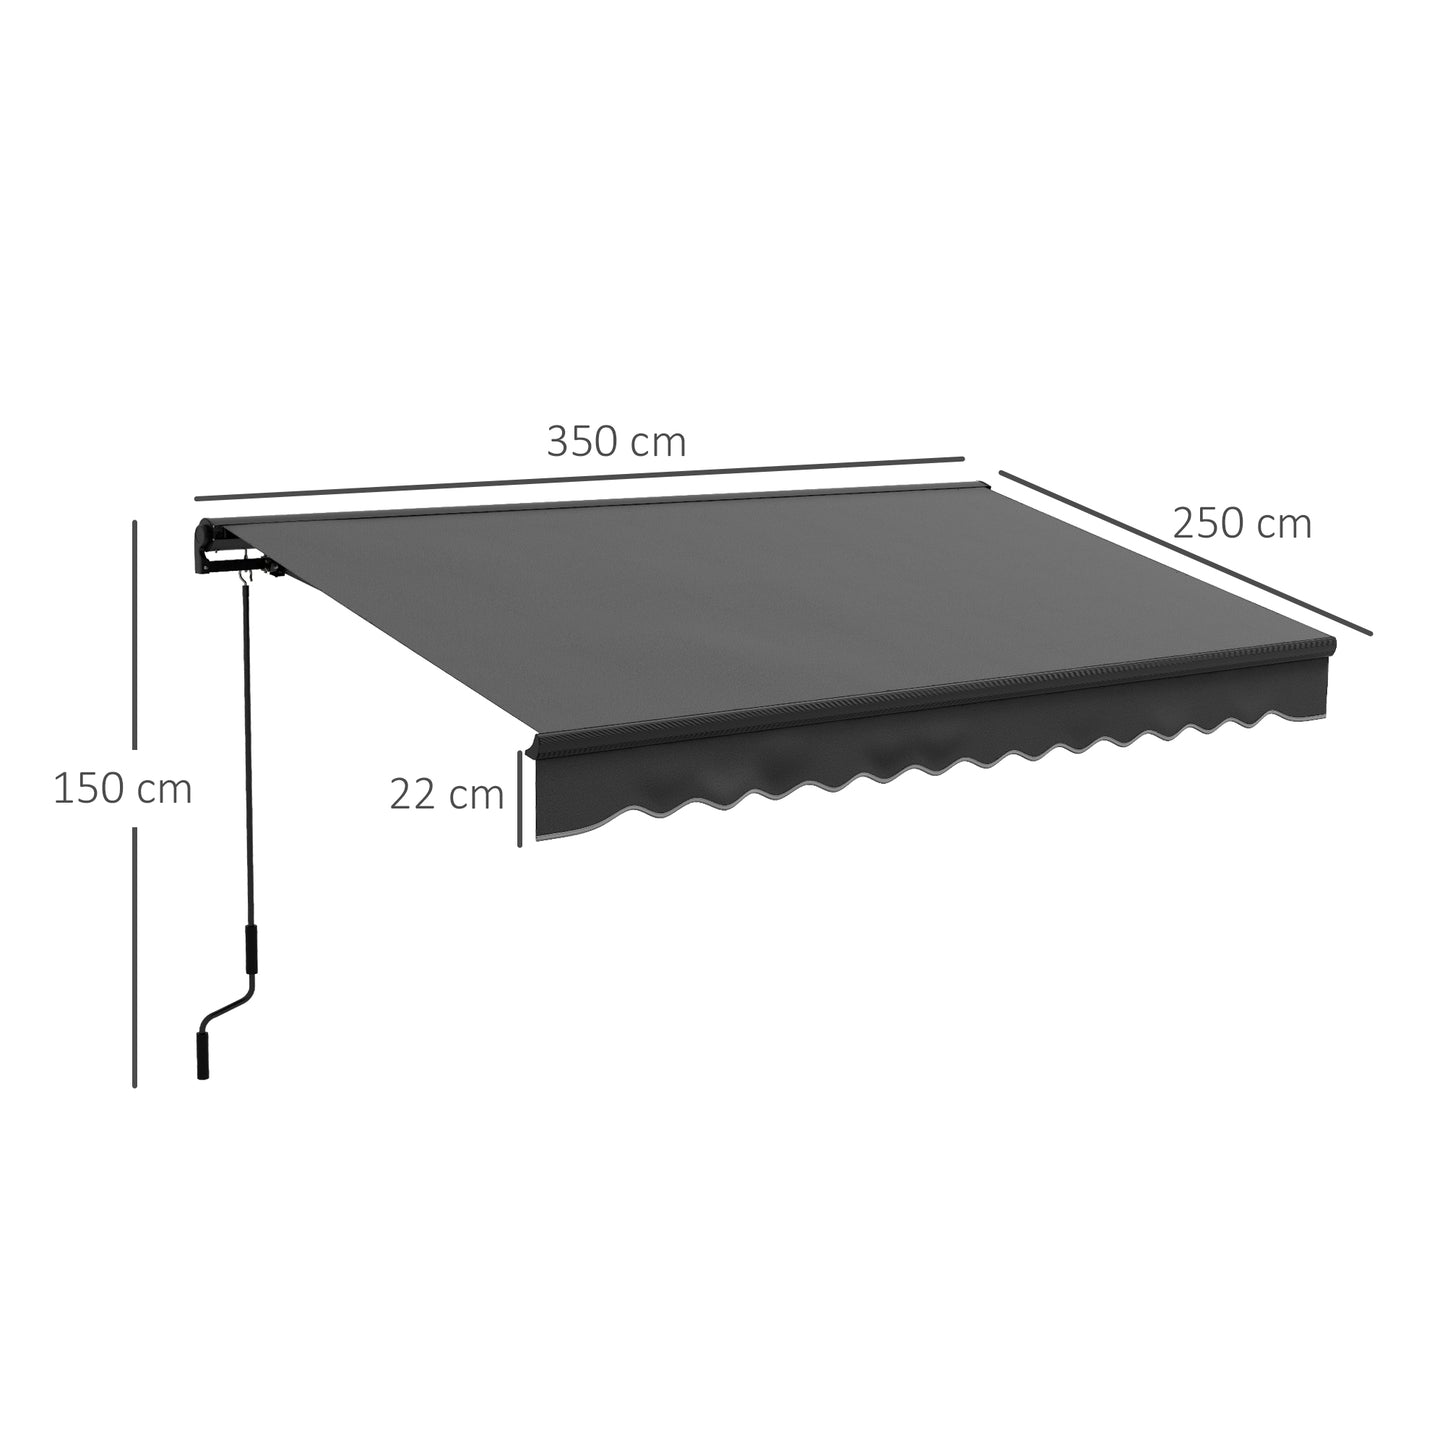 Outsunny 3.5 x 2.5m Aluminium Frame Electric Awning, Retractable Awning Sun Canopies for Patio Door Window, Dark Grey